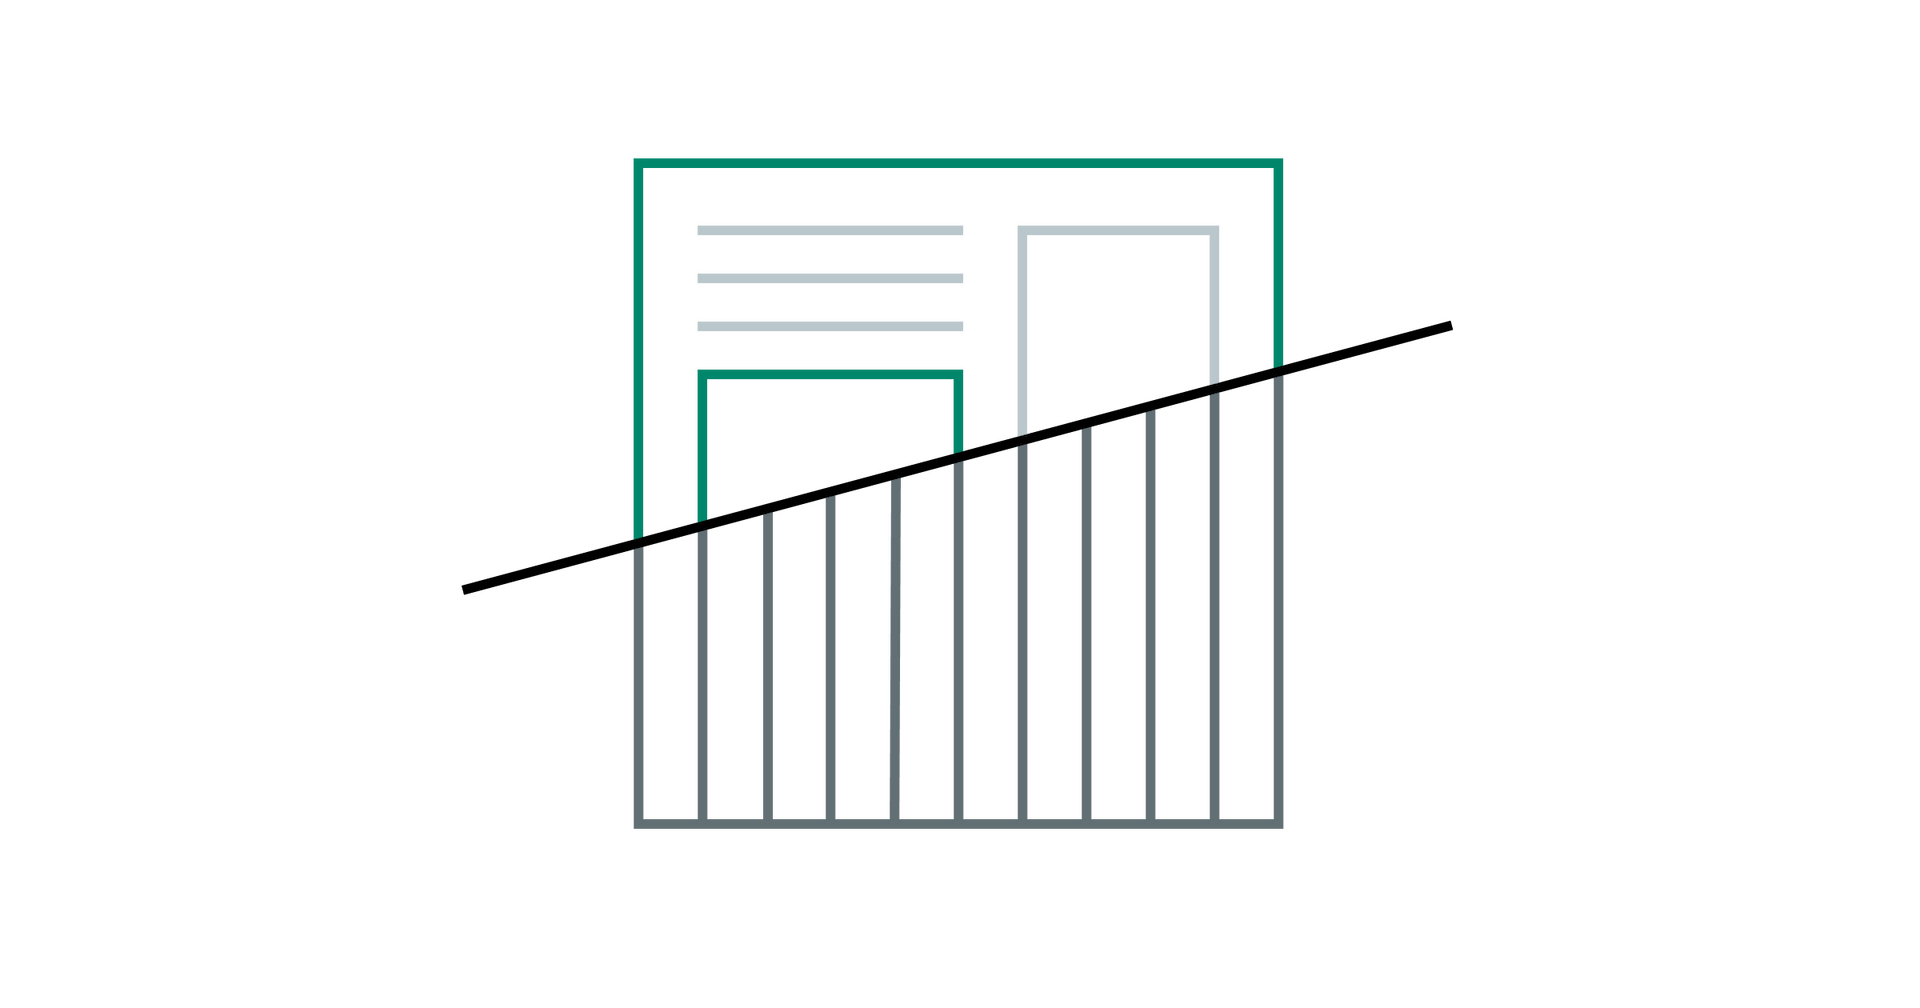 A transparent newsletter/newspaper style outline minimal icon, cut in half by a vertical bar chart